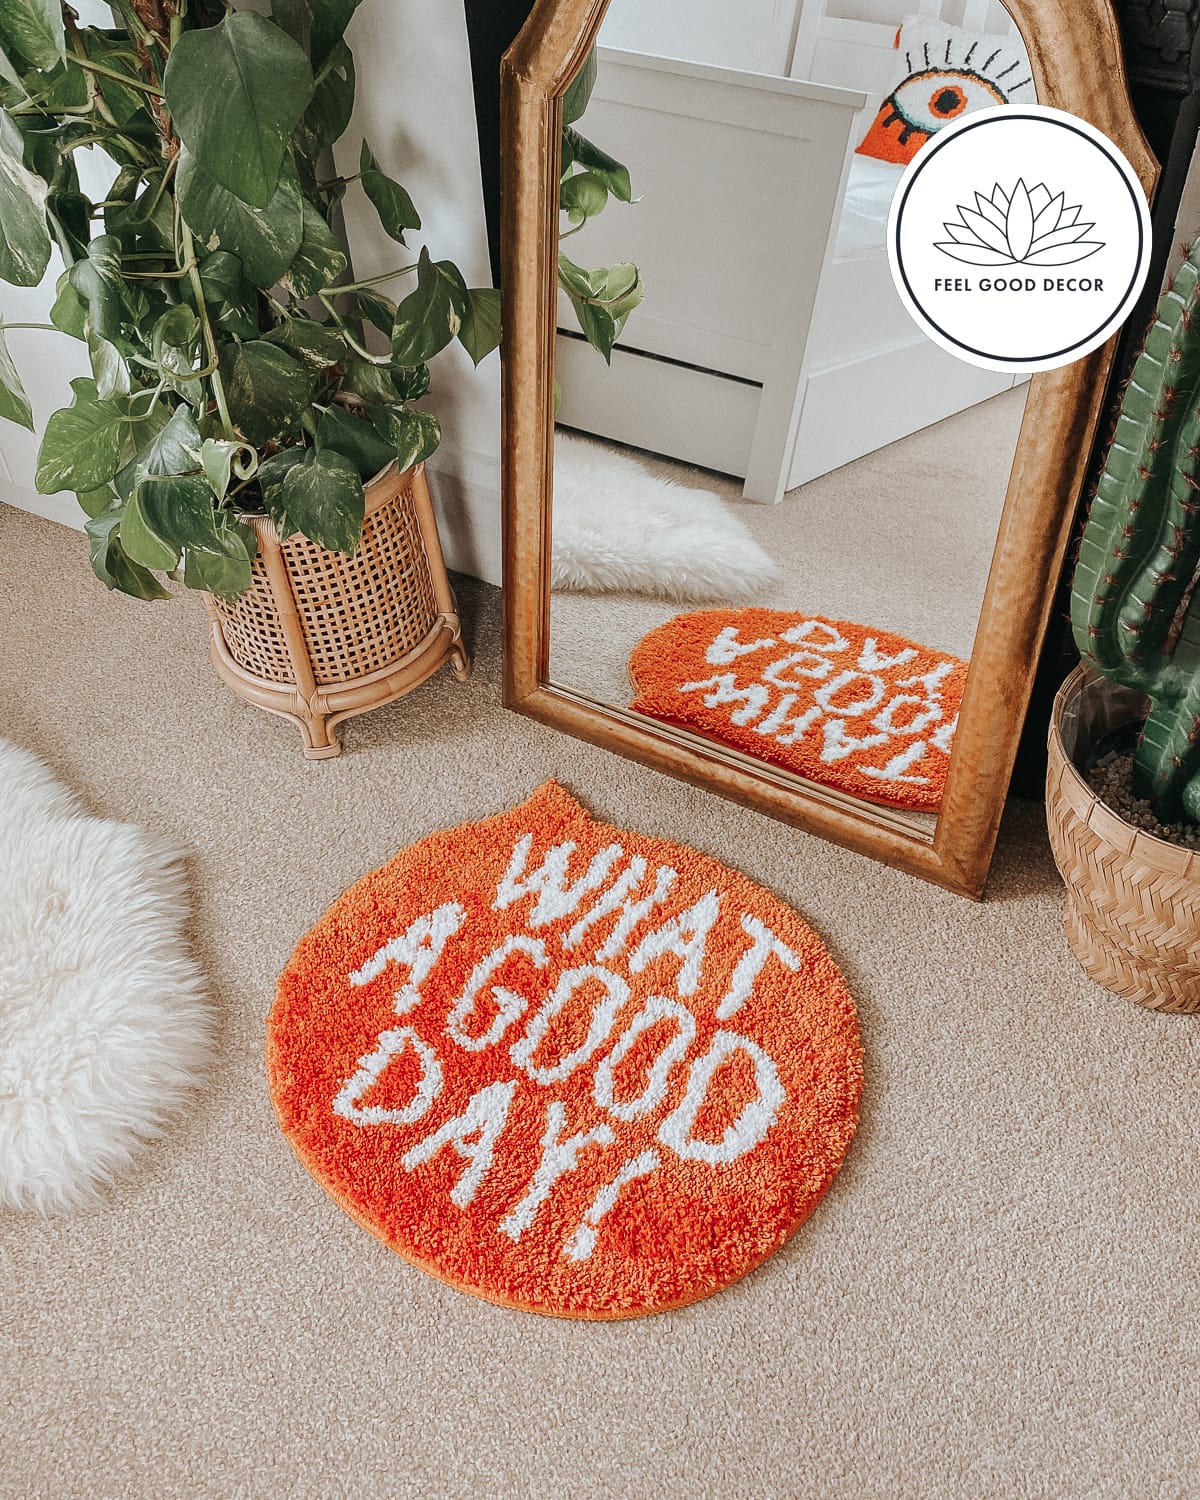 https://feelgooddecor.com/wp-content/uploads/2021/10/What-A-Good-Day-Positive-Quote-Decorative-Orange-Floor-Mat-0.jpg